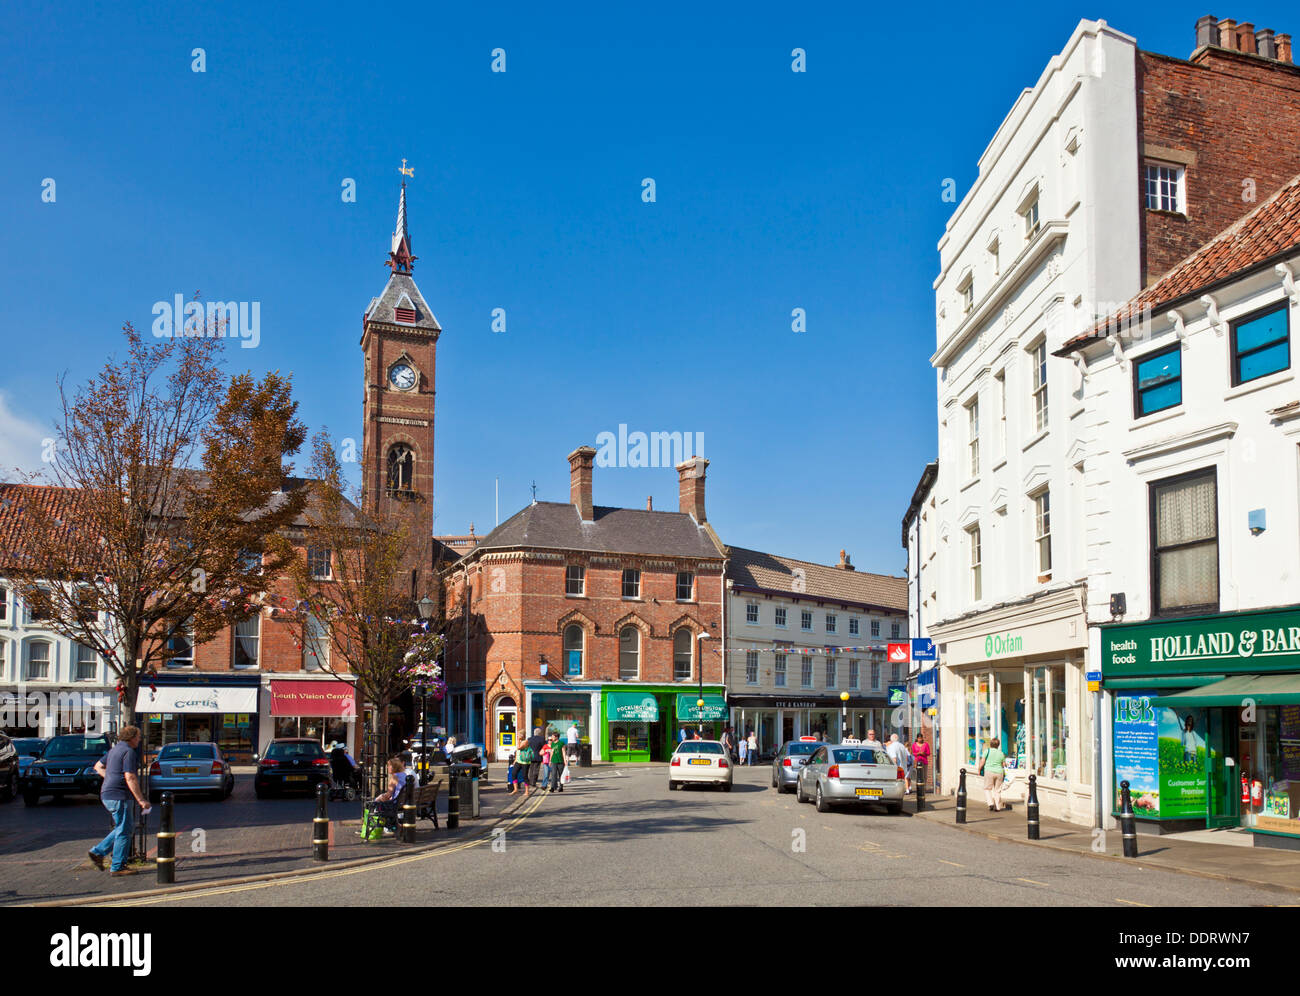 Louth Lincolnshire The main street, market place and shops in Louth Lincolnshire Louth Lincolnshire England UK GB Europe Stock Photo